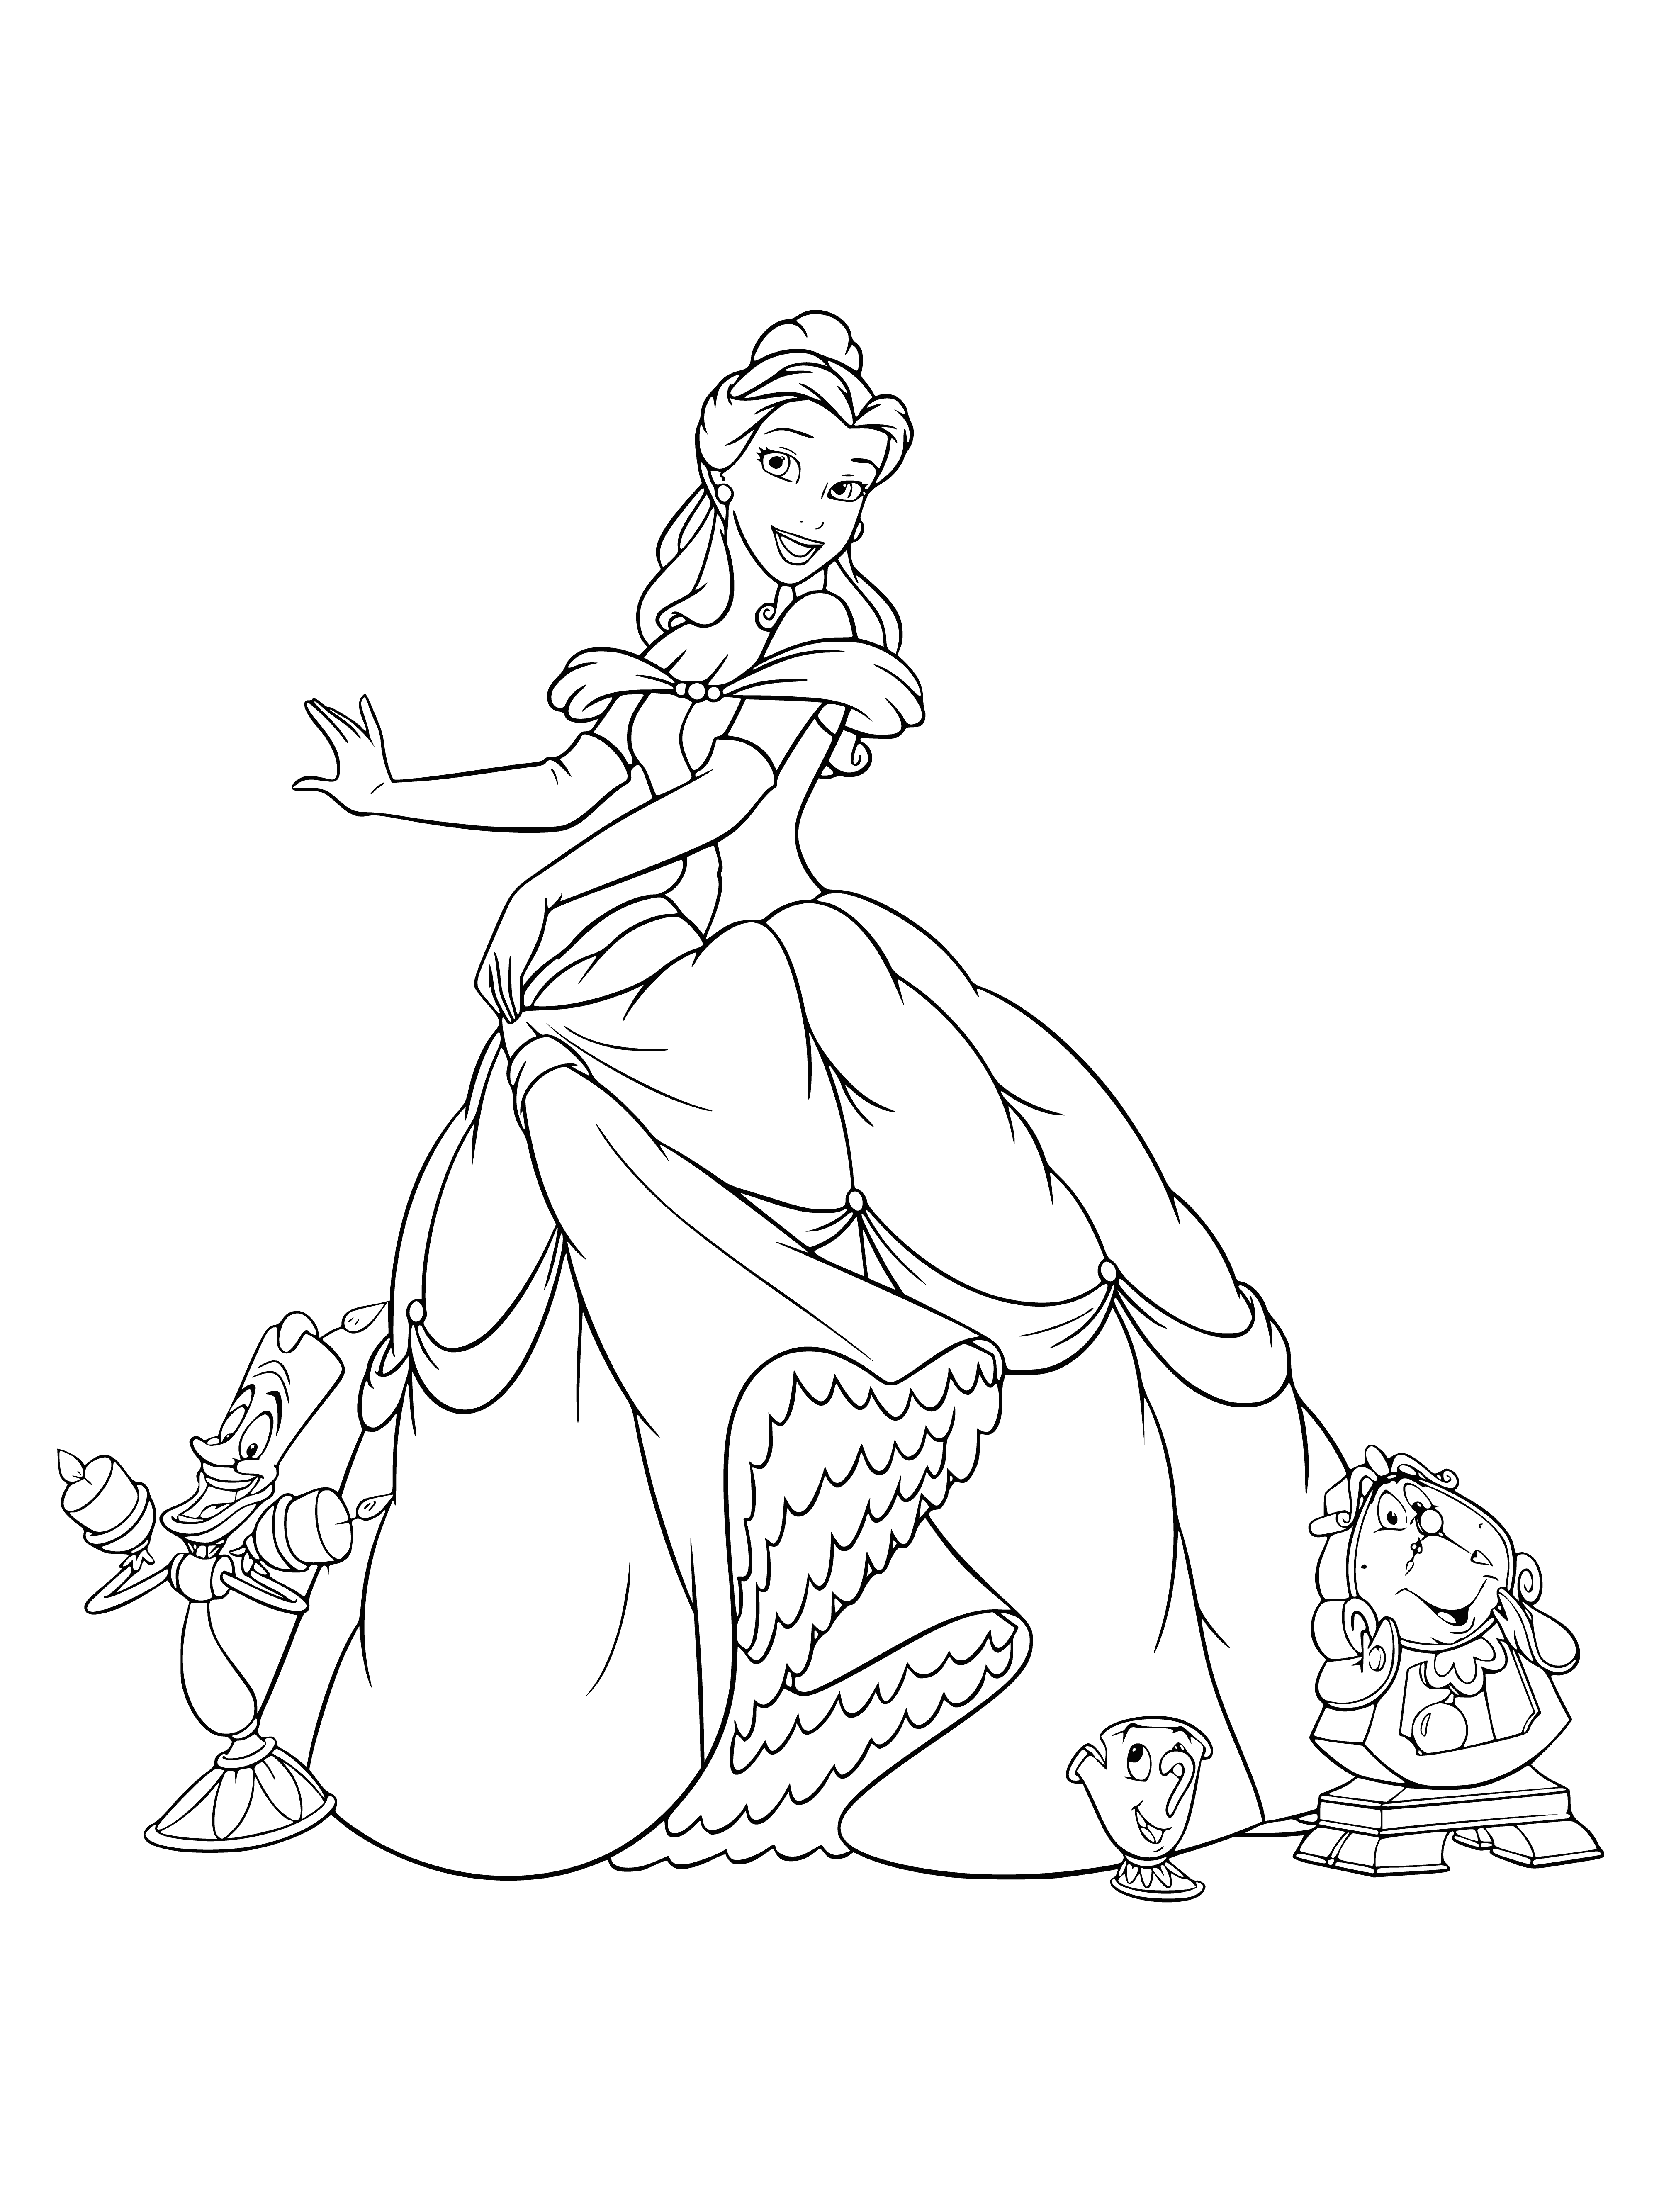 coloring page: Belle and her servant admire each other in a castle, her in a yellow dress & him in green shirt and brown pants.